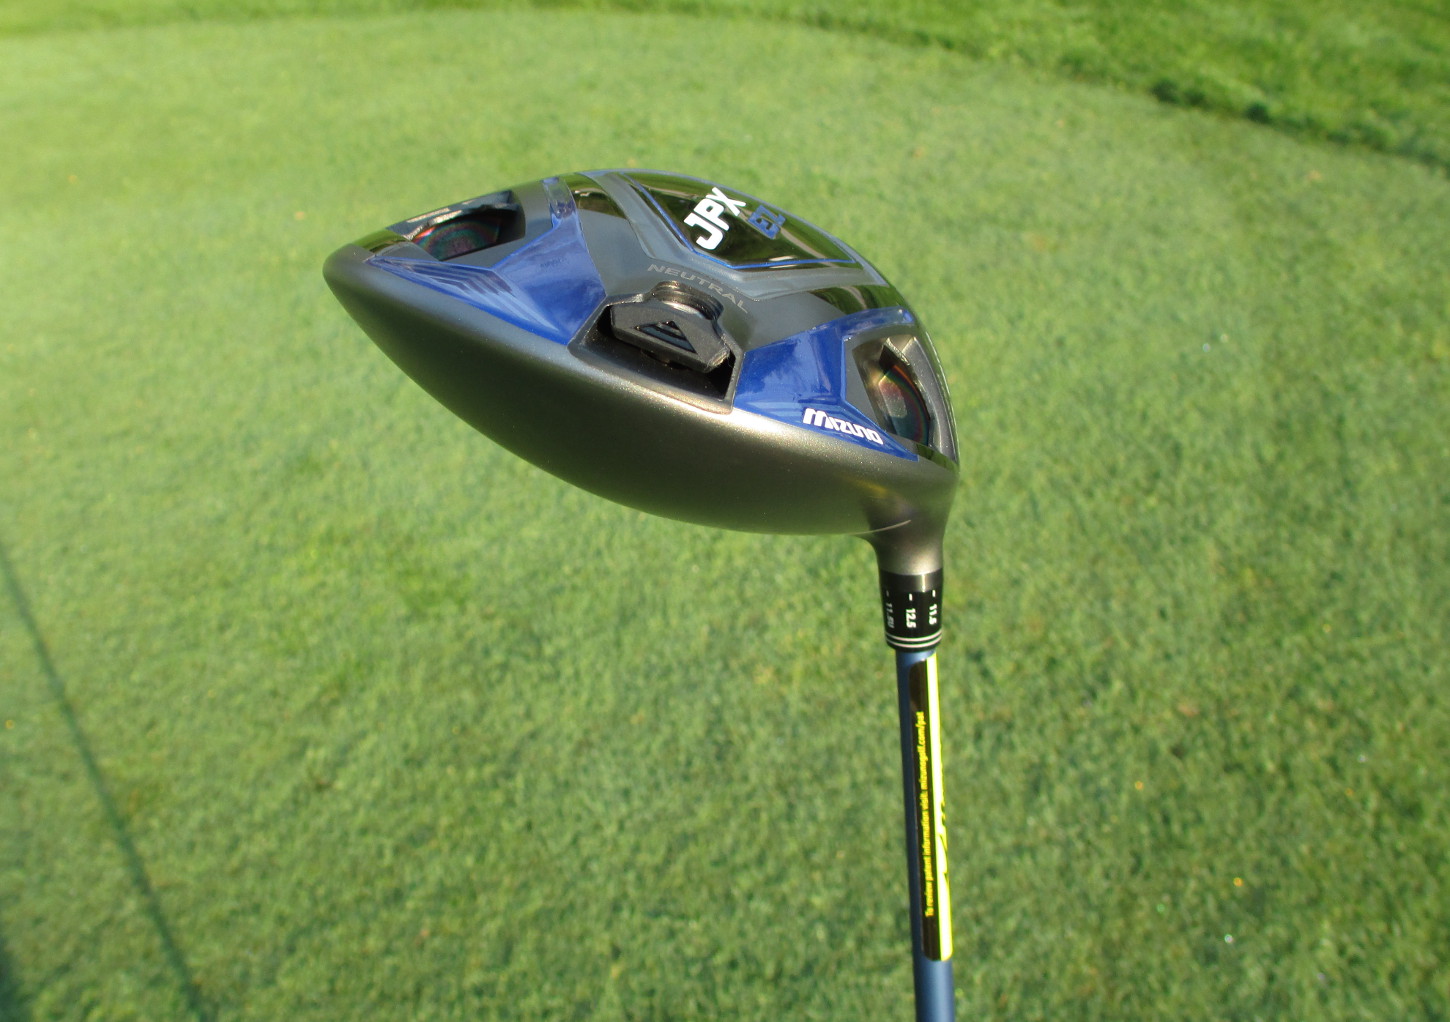 The JPX-EZ should be a good all around performer for a large number of golfers.